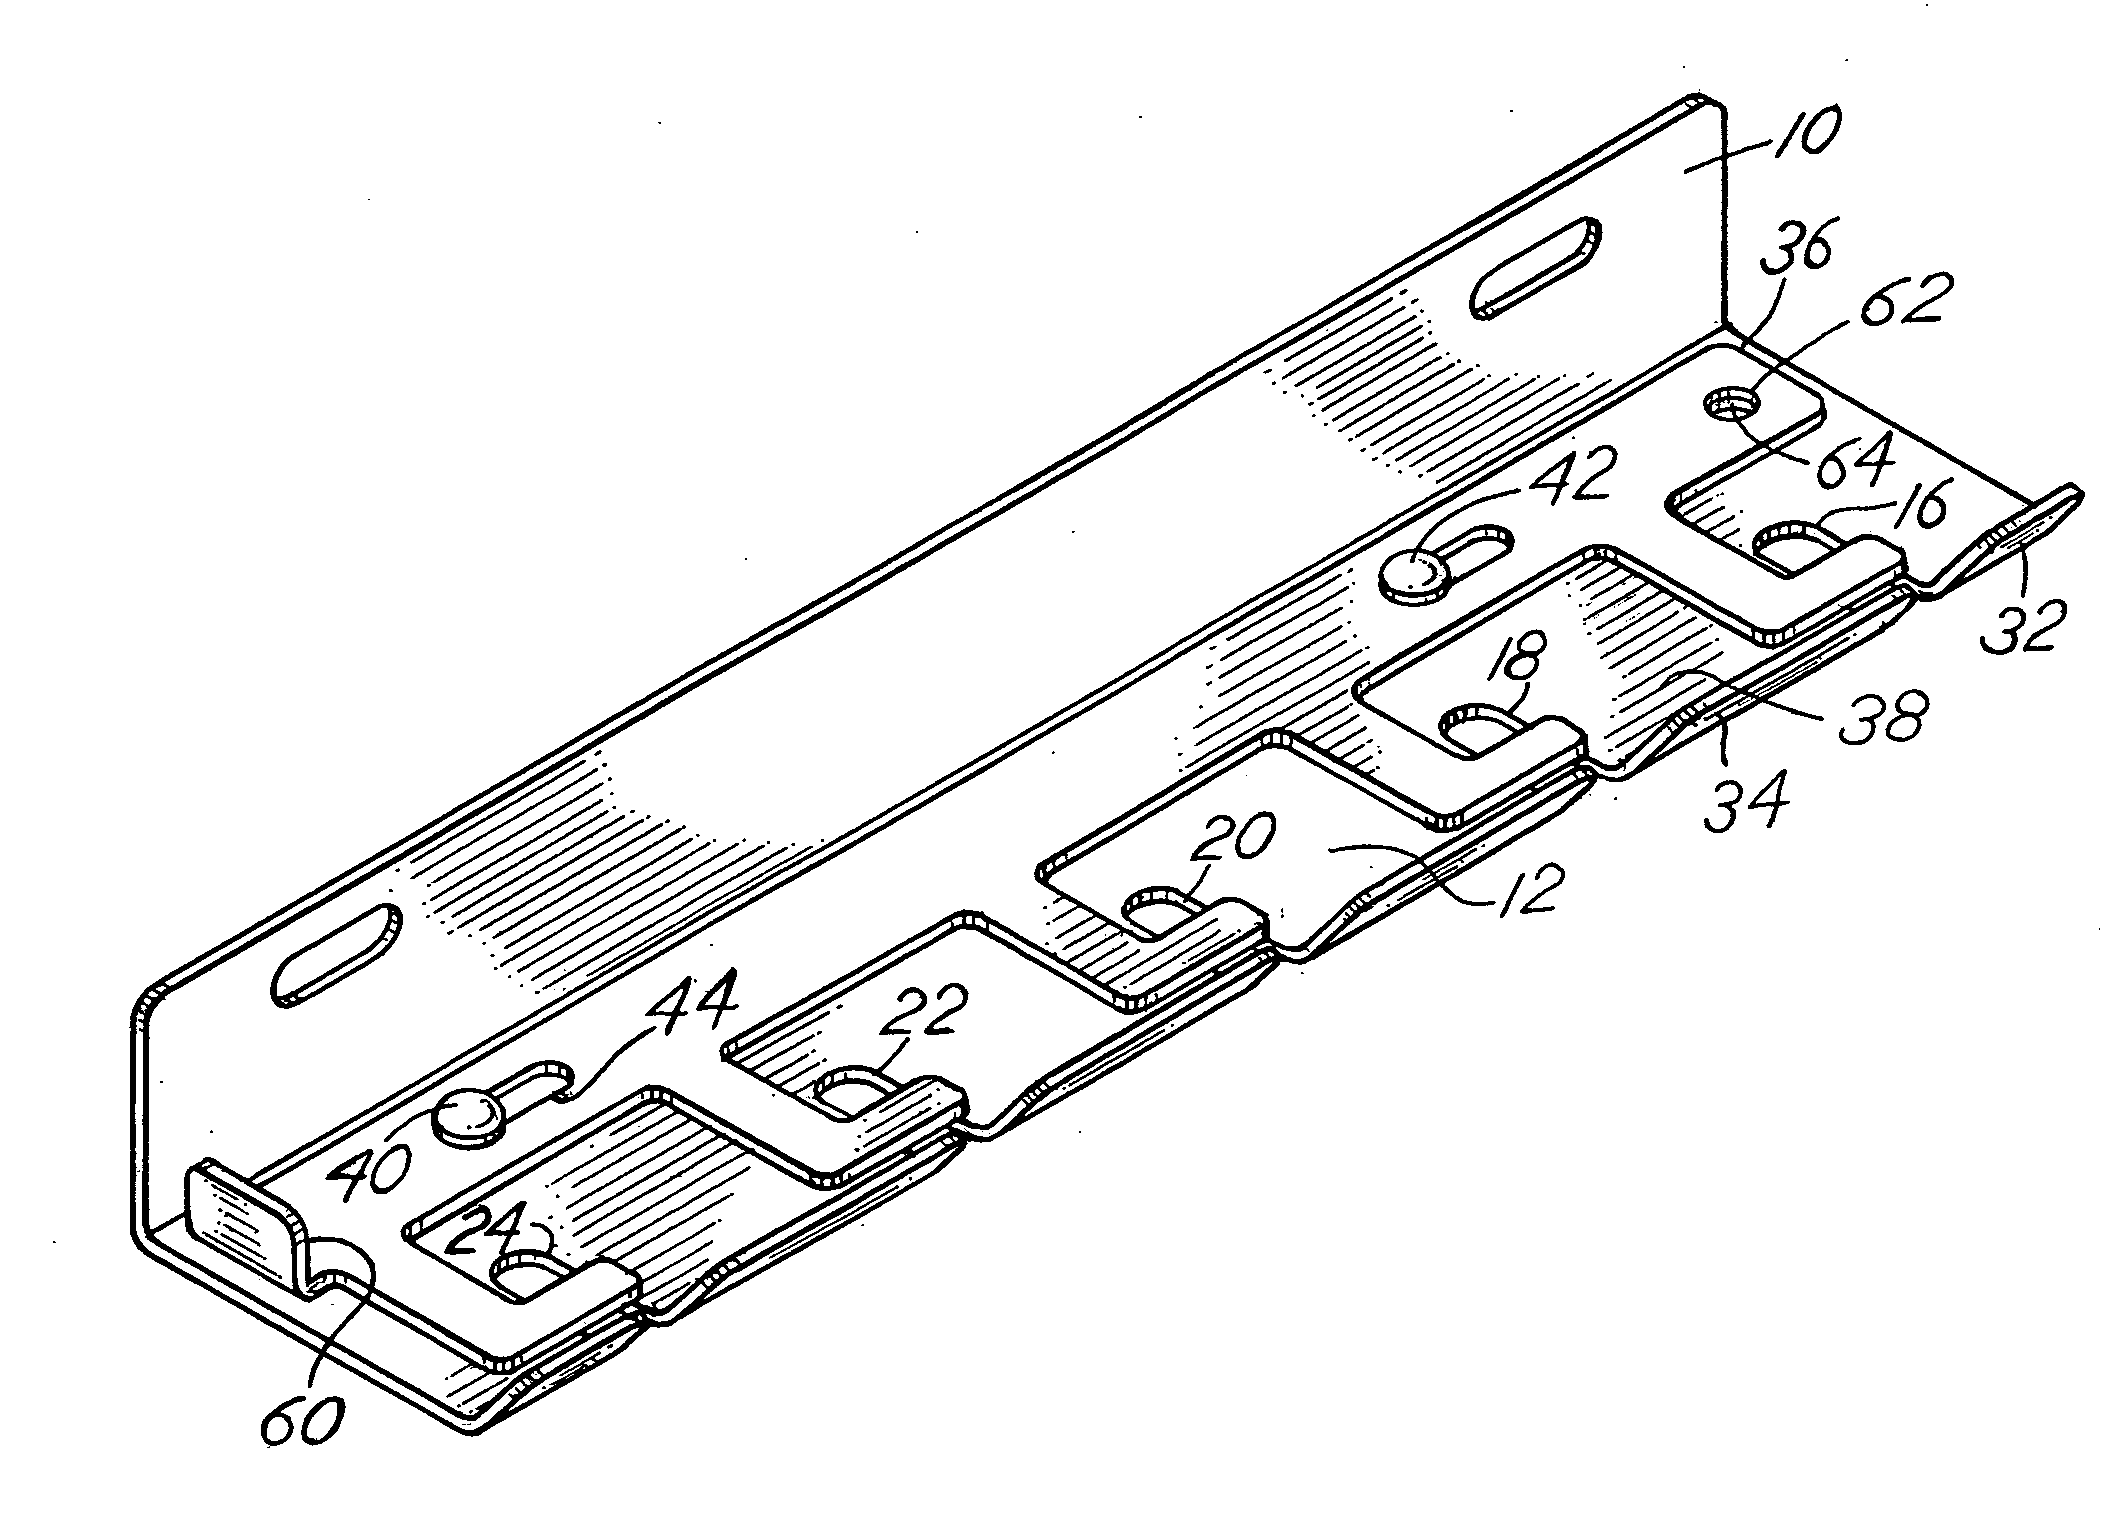 Tool holder with a locking mechanism